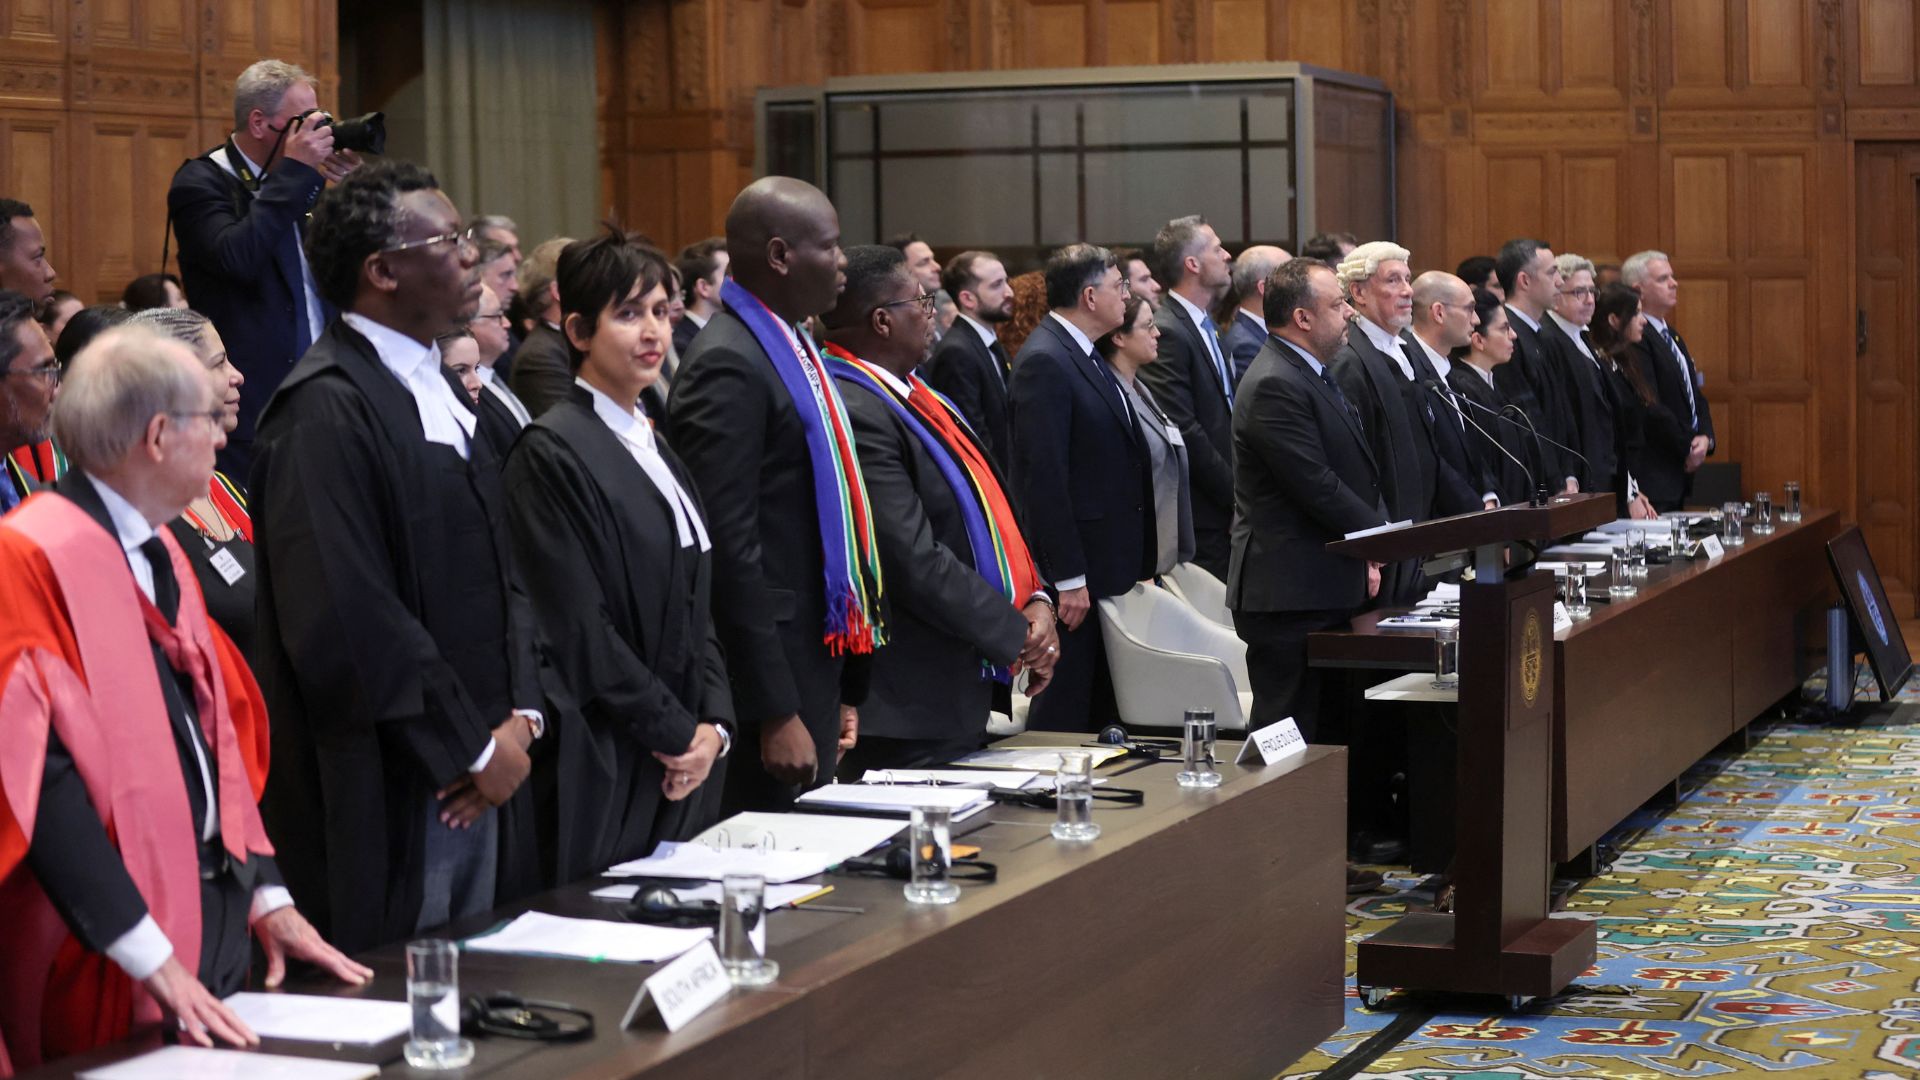 South Africa's Minister of Justice Ronald Lamola, lawyer Adela Hassim and the delegation stand as judges at the ICJ. /Thilo Schmuelgen/Reuters